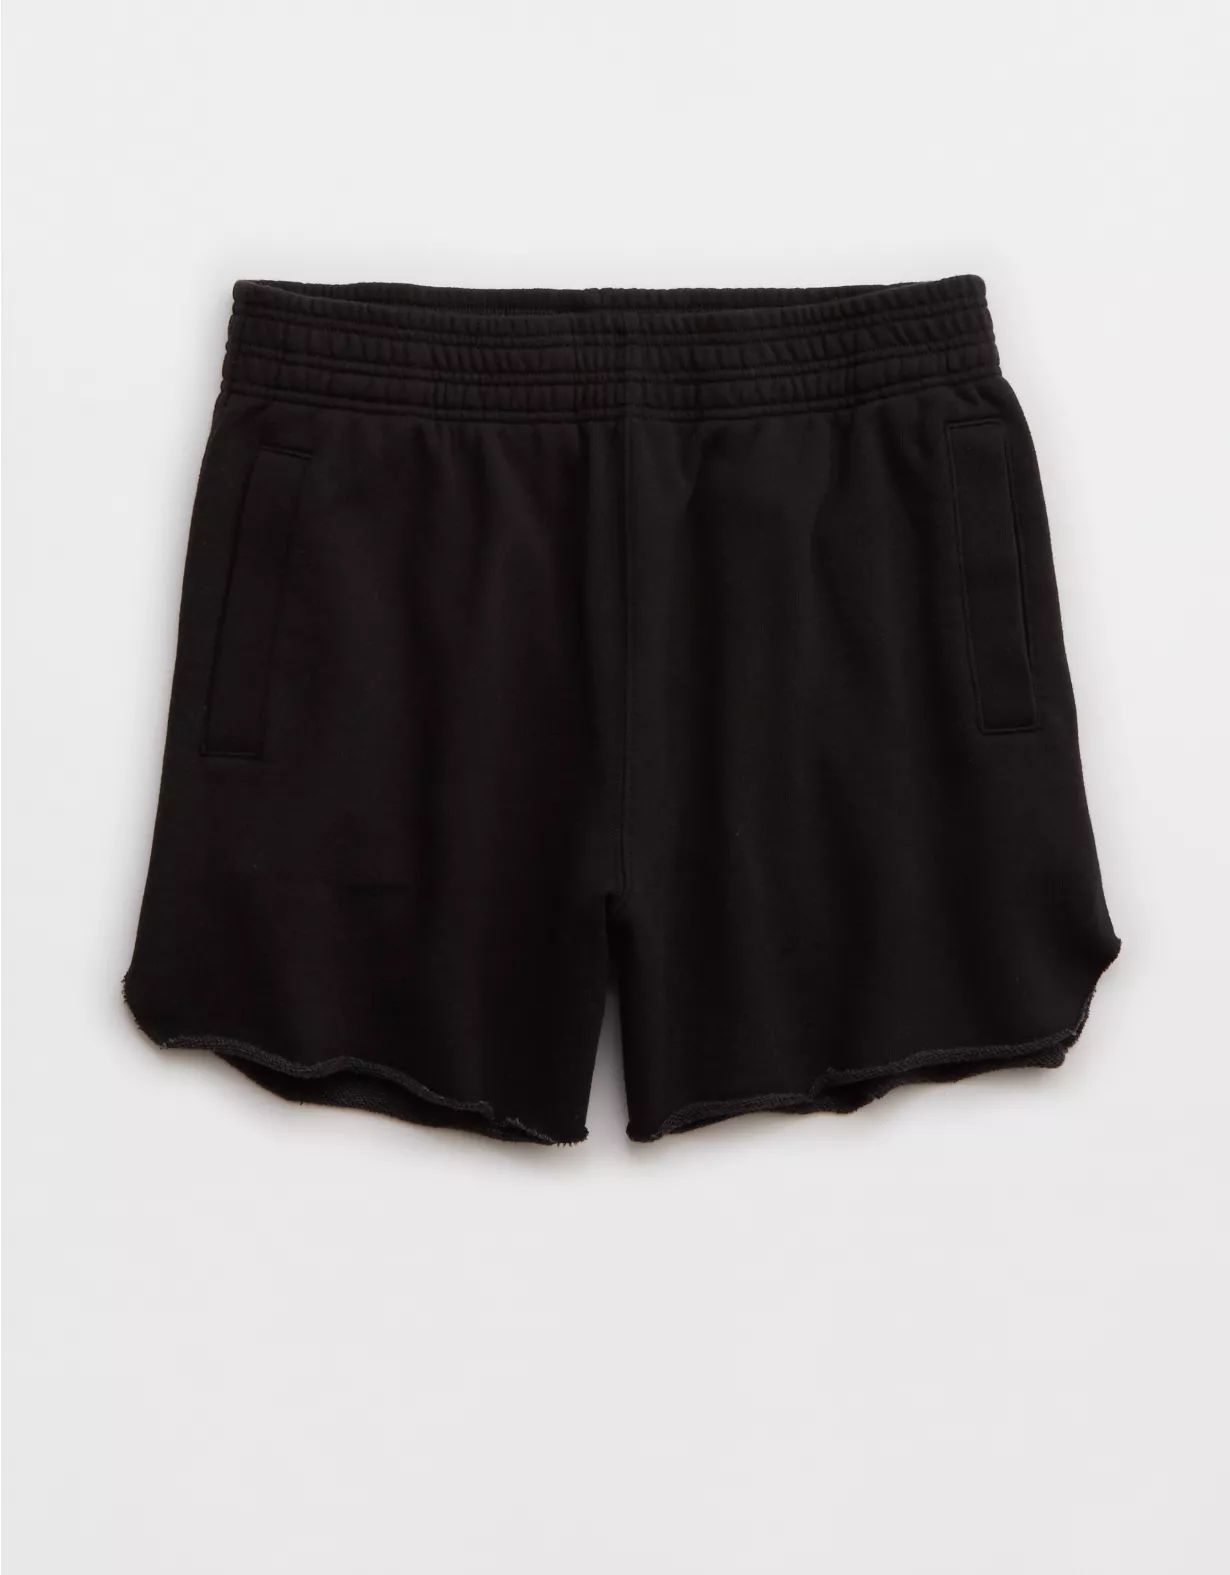 Aerie On My Way! High Waisted Short | Aerie